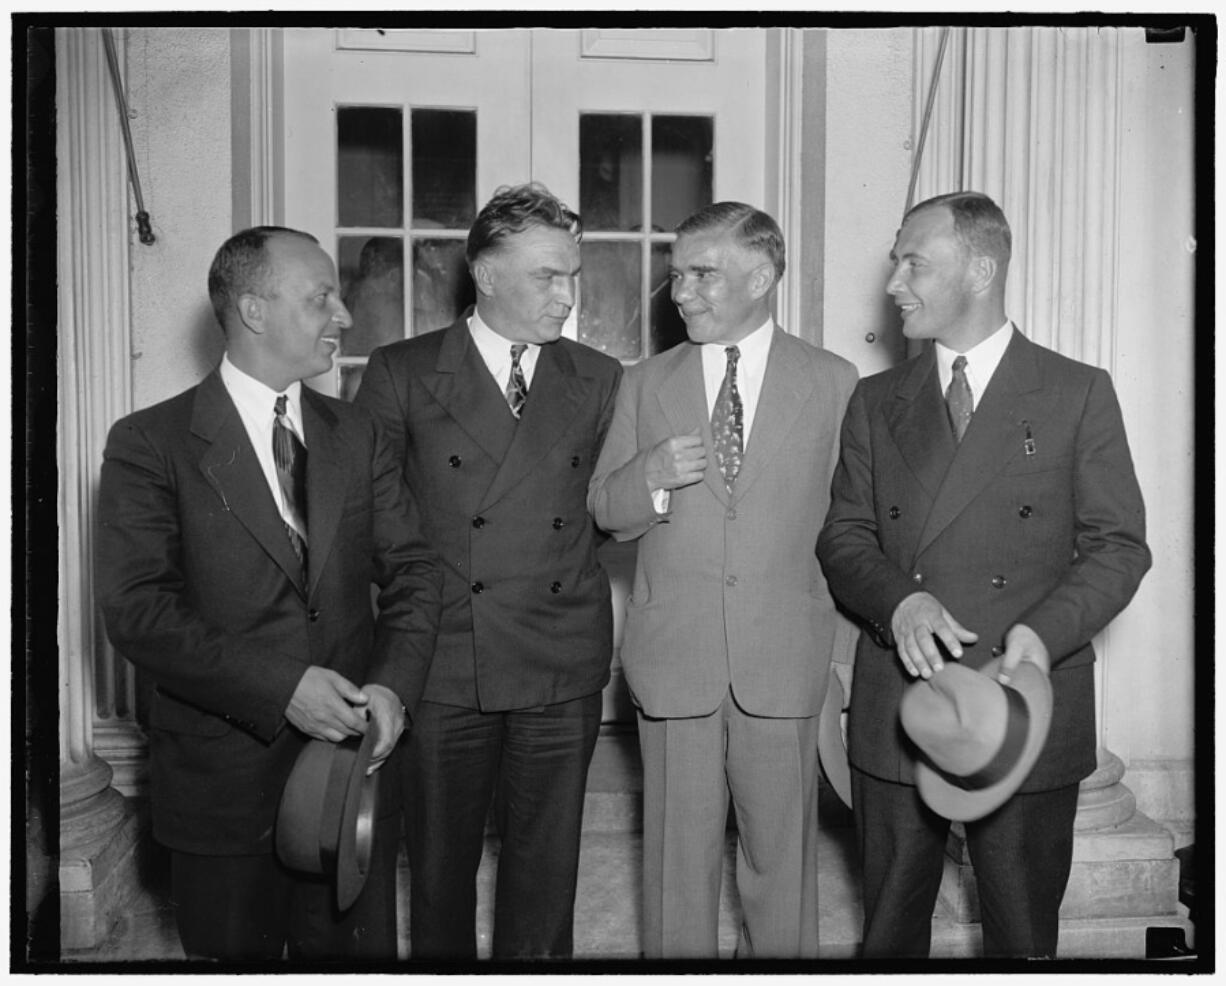 The Soviet ANT-25 transpolar flight crew, navigator Alexander Belyakov, left, pilot Valery Chkalov and co-pilot Georgi Baidukov, wait in the White House with an unknown man in 1937. Portland’s Meier & Frank department store owner exchanged three new suits with them, gaining a fur-lined flying suit for his window display. However, the Soviets declined to part with their long underwear.